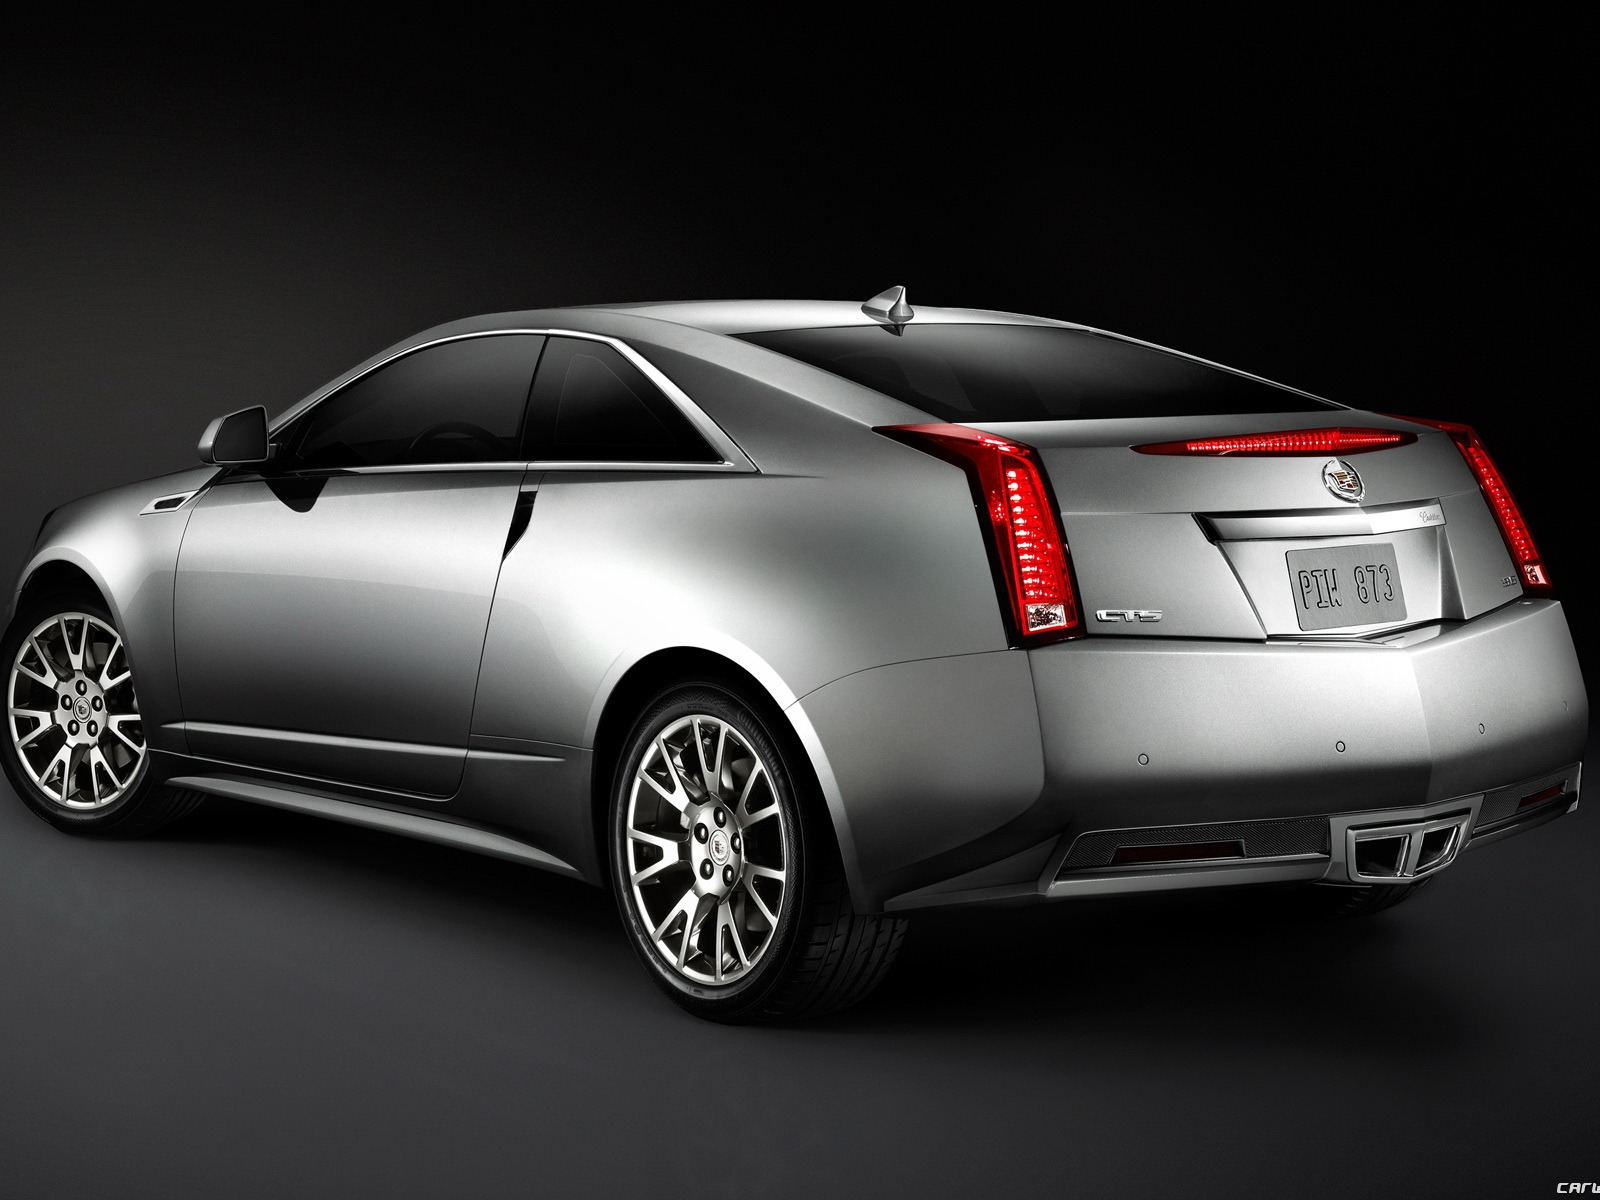 Cadillac CTS Coupe - 2011 凱迪拉克 #6 - 1600x1200